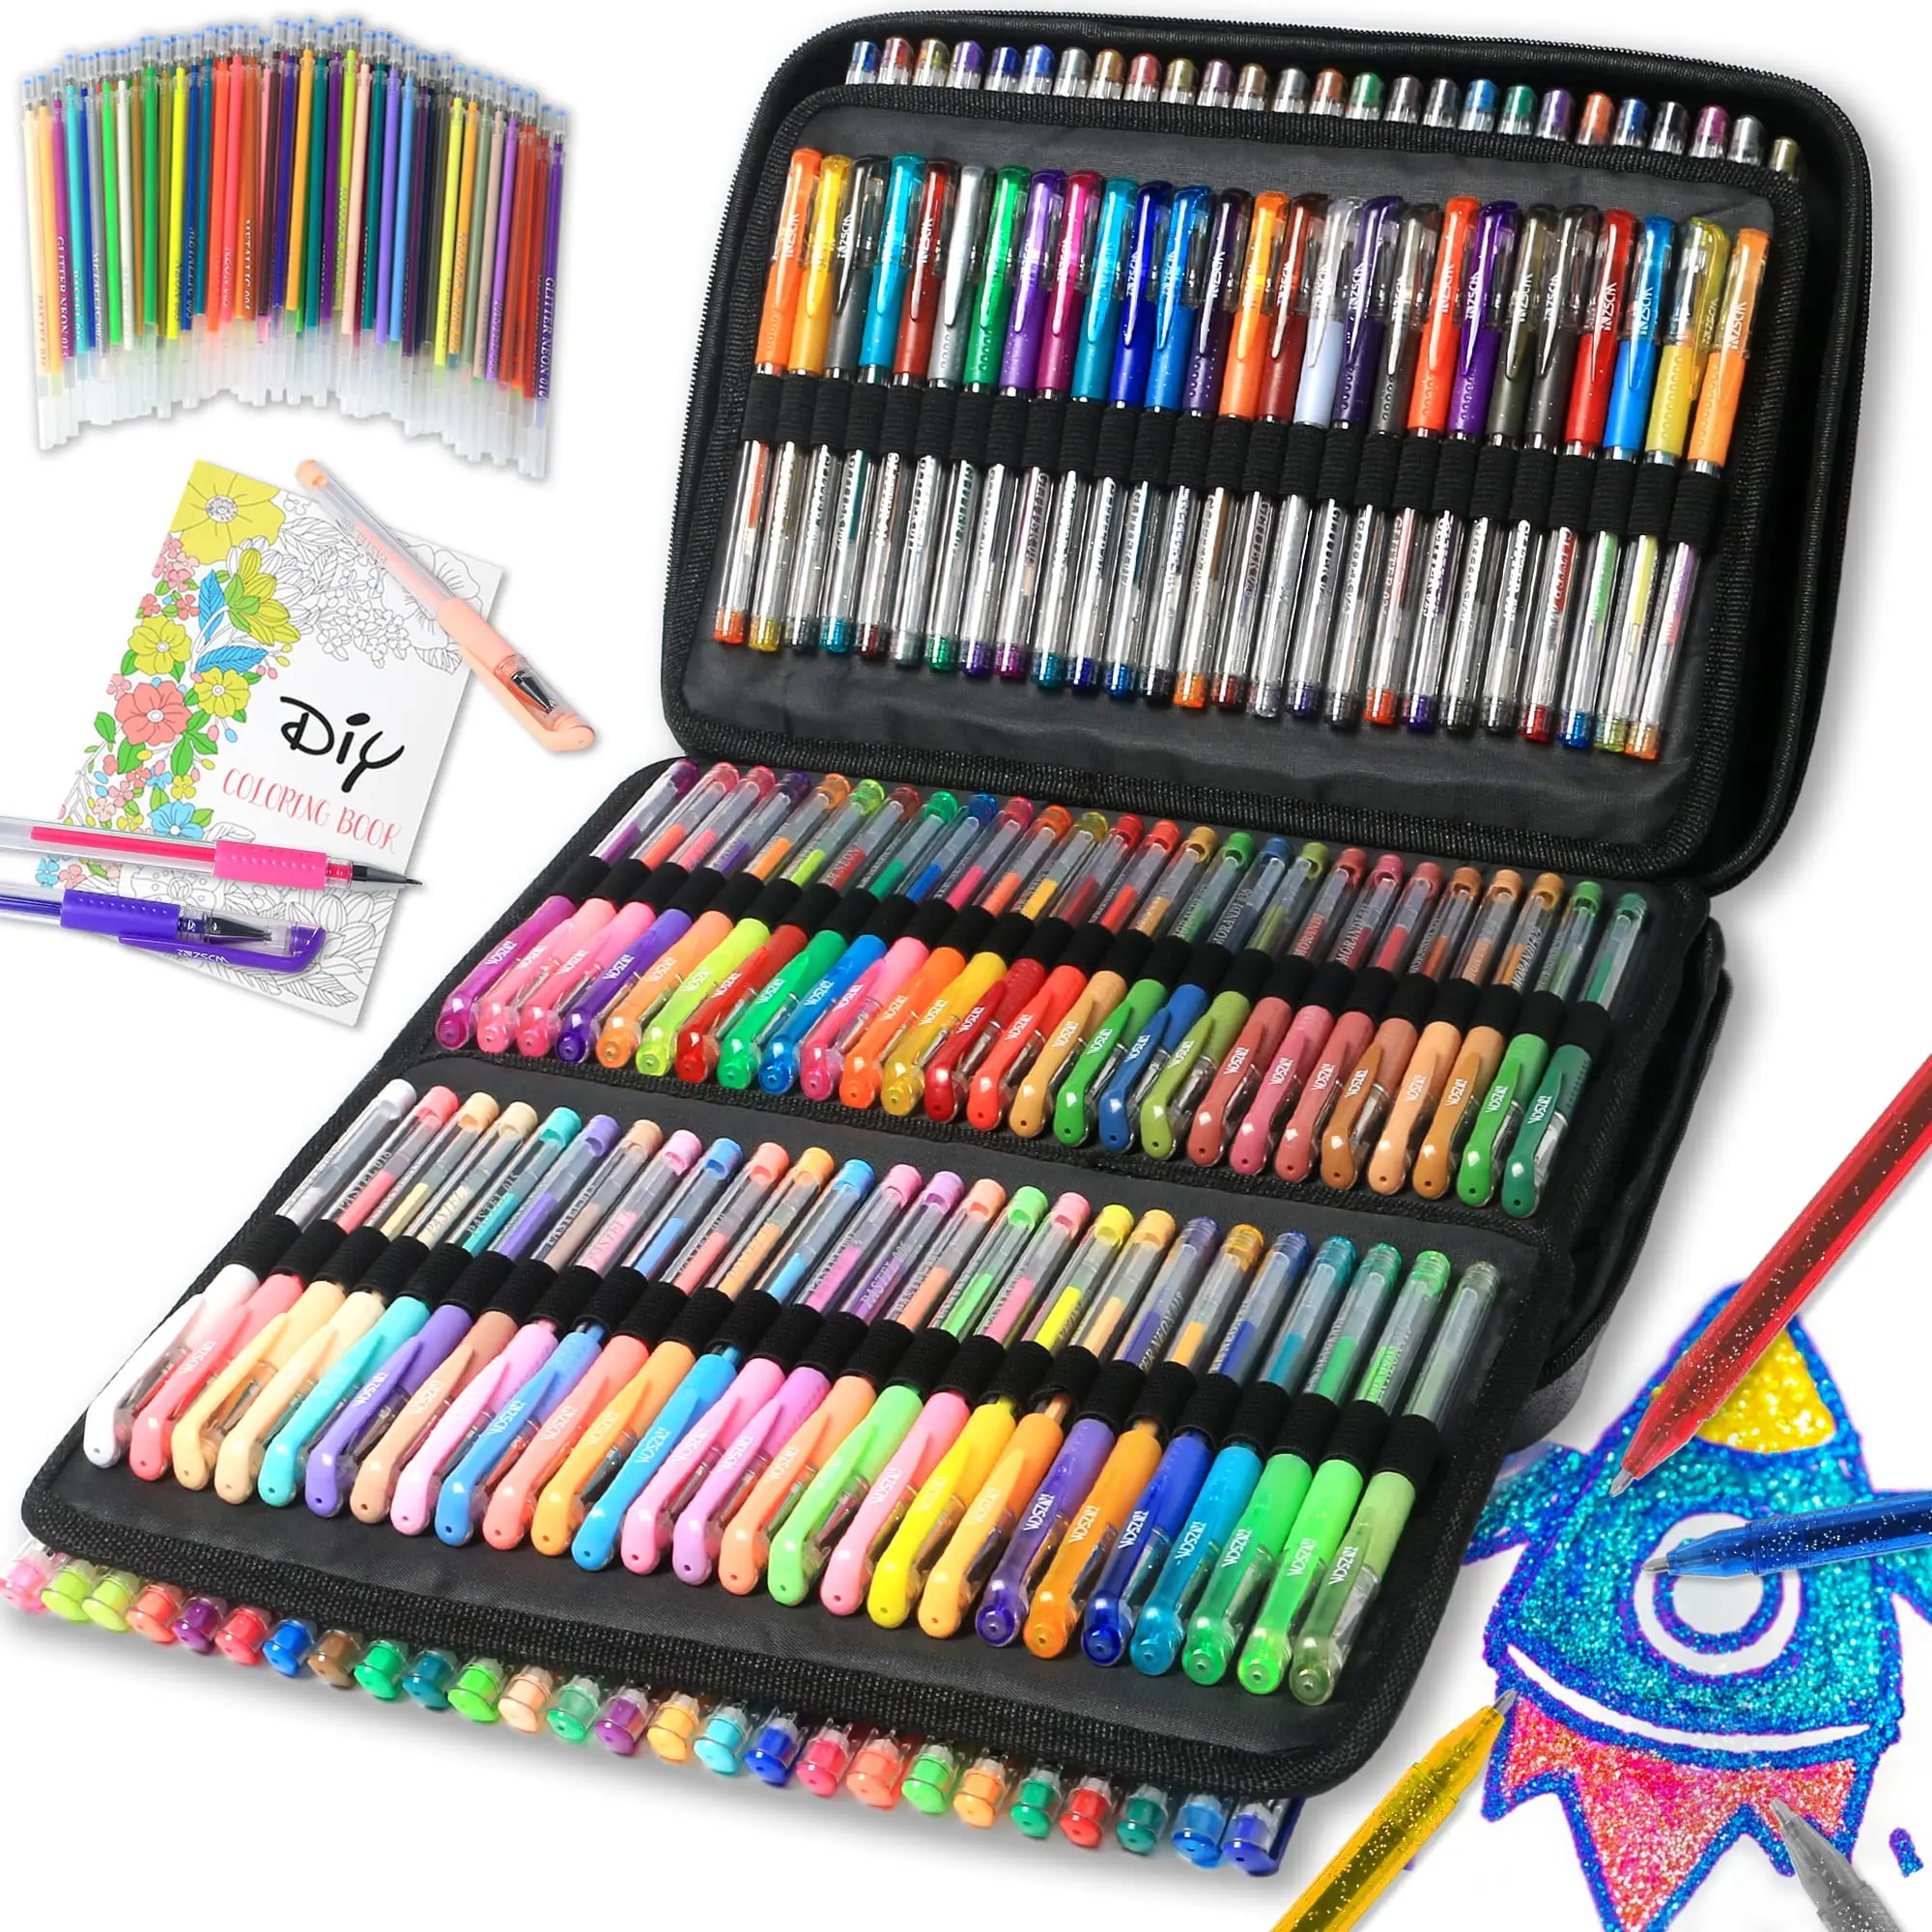 ZSCM Metallic Sparkle Glitter Gel Pens,48 Pack Coloring Pen Art Markers  with Case, 24 Sparkle Pen with 24 Glitter Refills for Kids Adult Coloring  Book